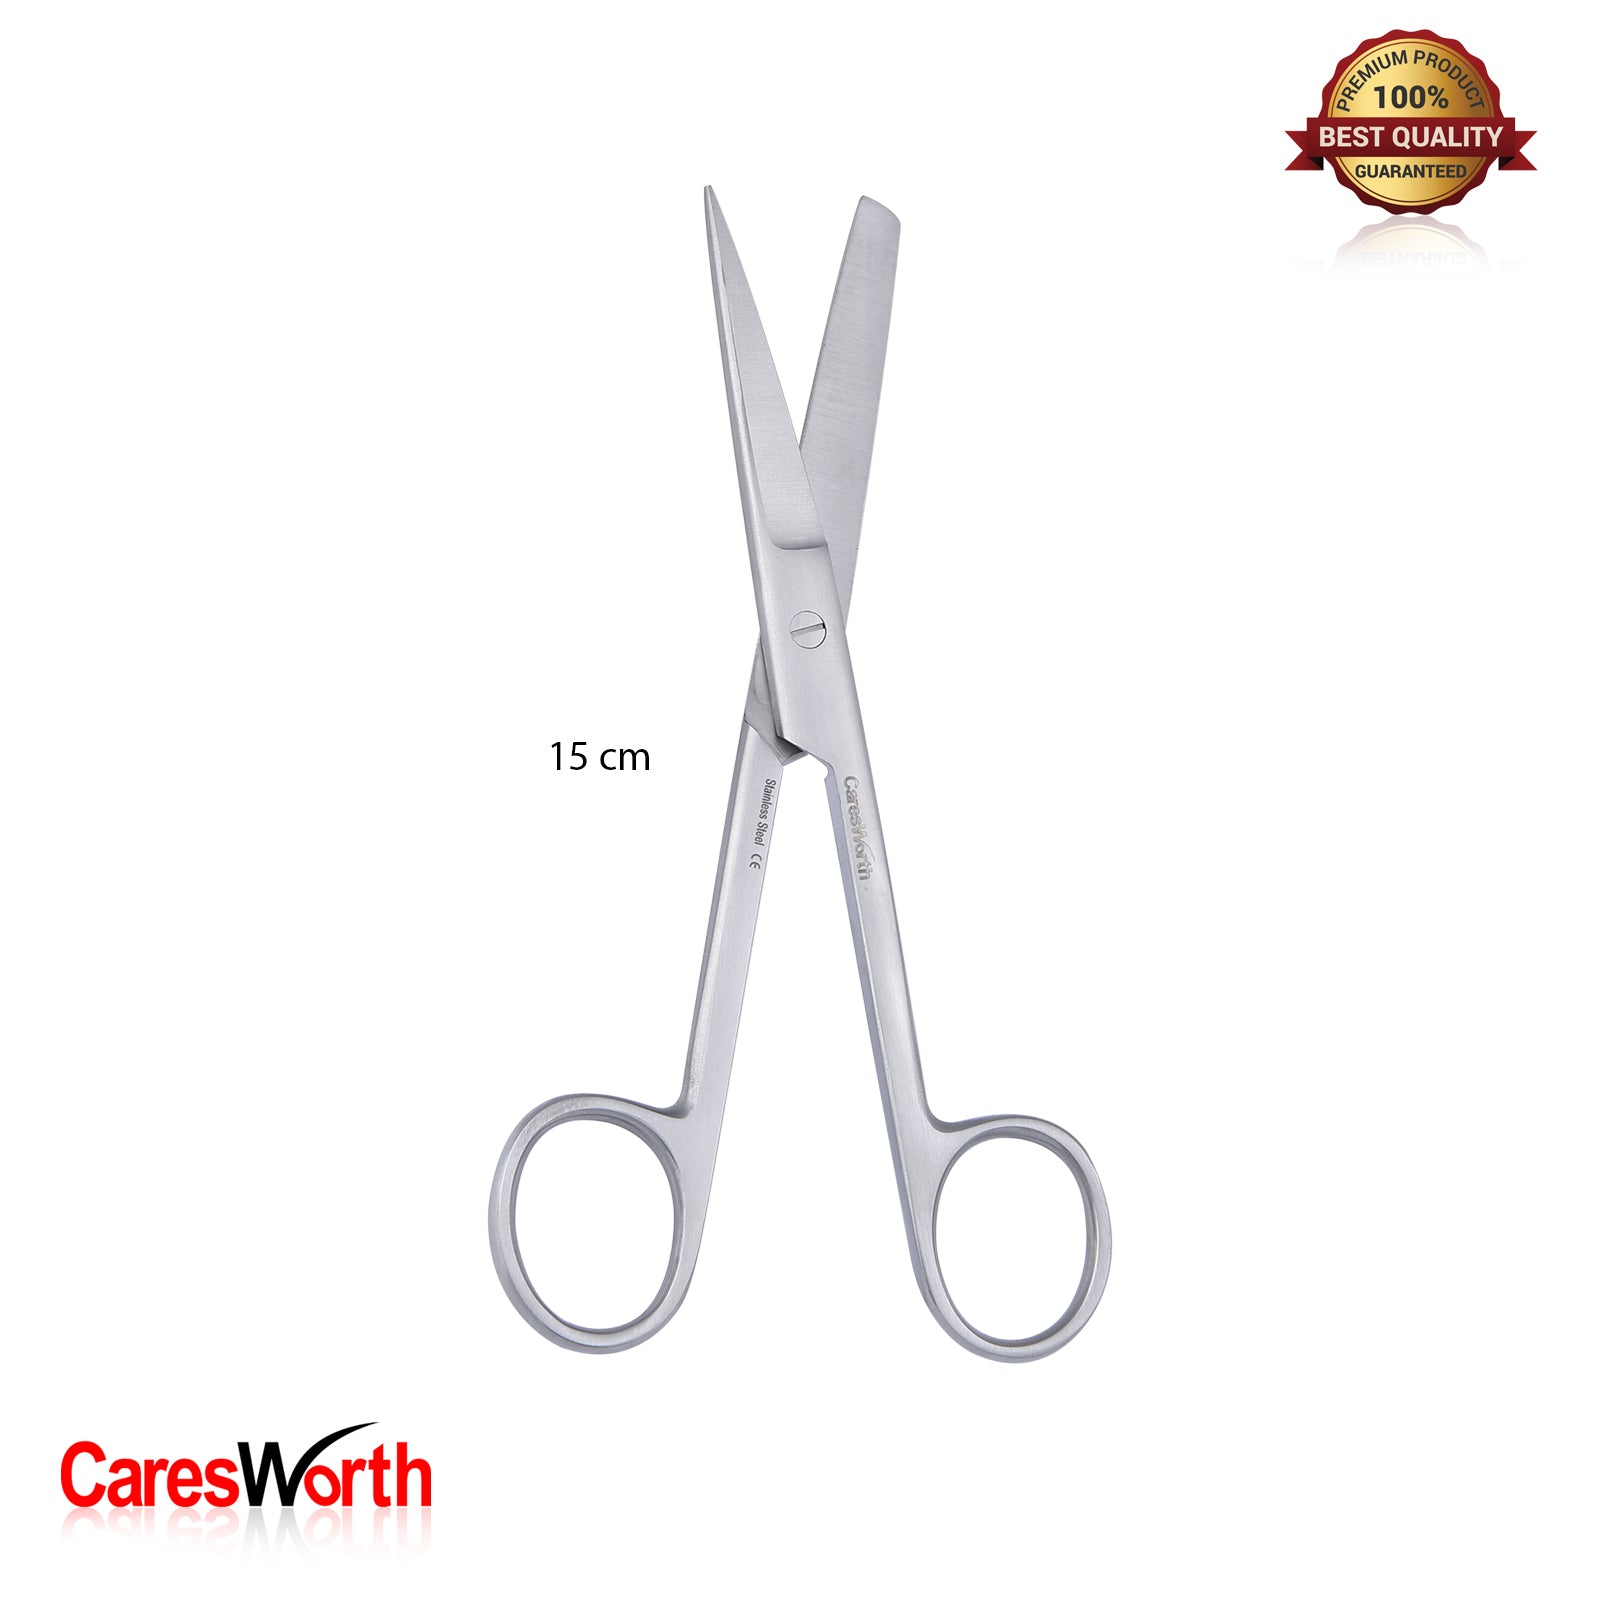 Operating/Dressing Scissors Sharp/Blunt Surgical Stainless Steel - 3 Sizes